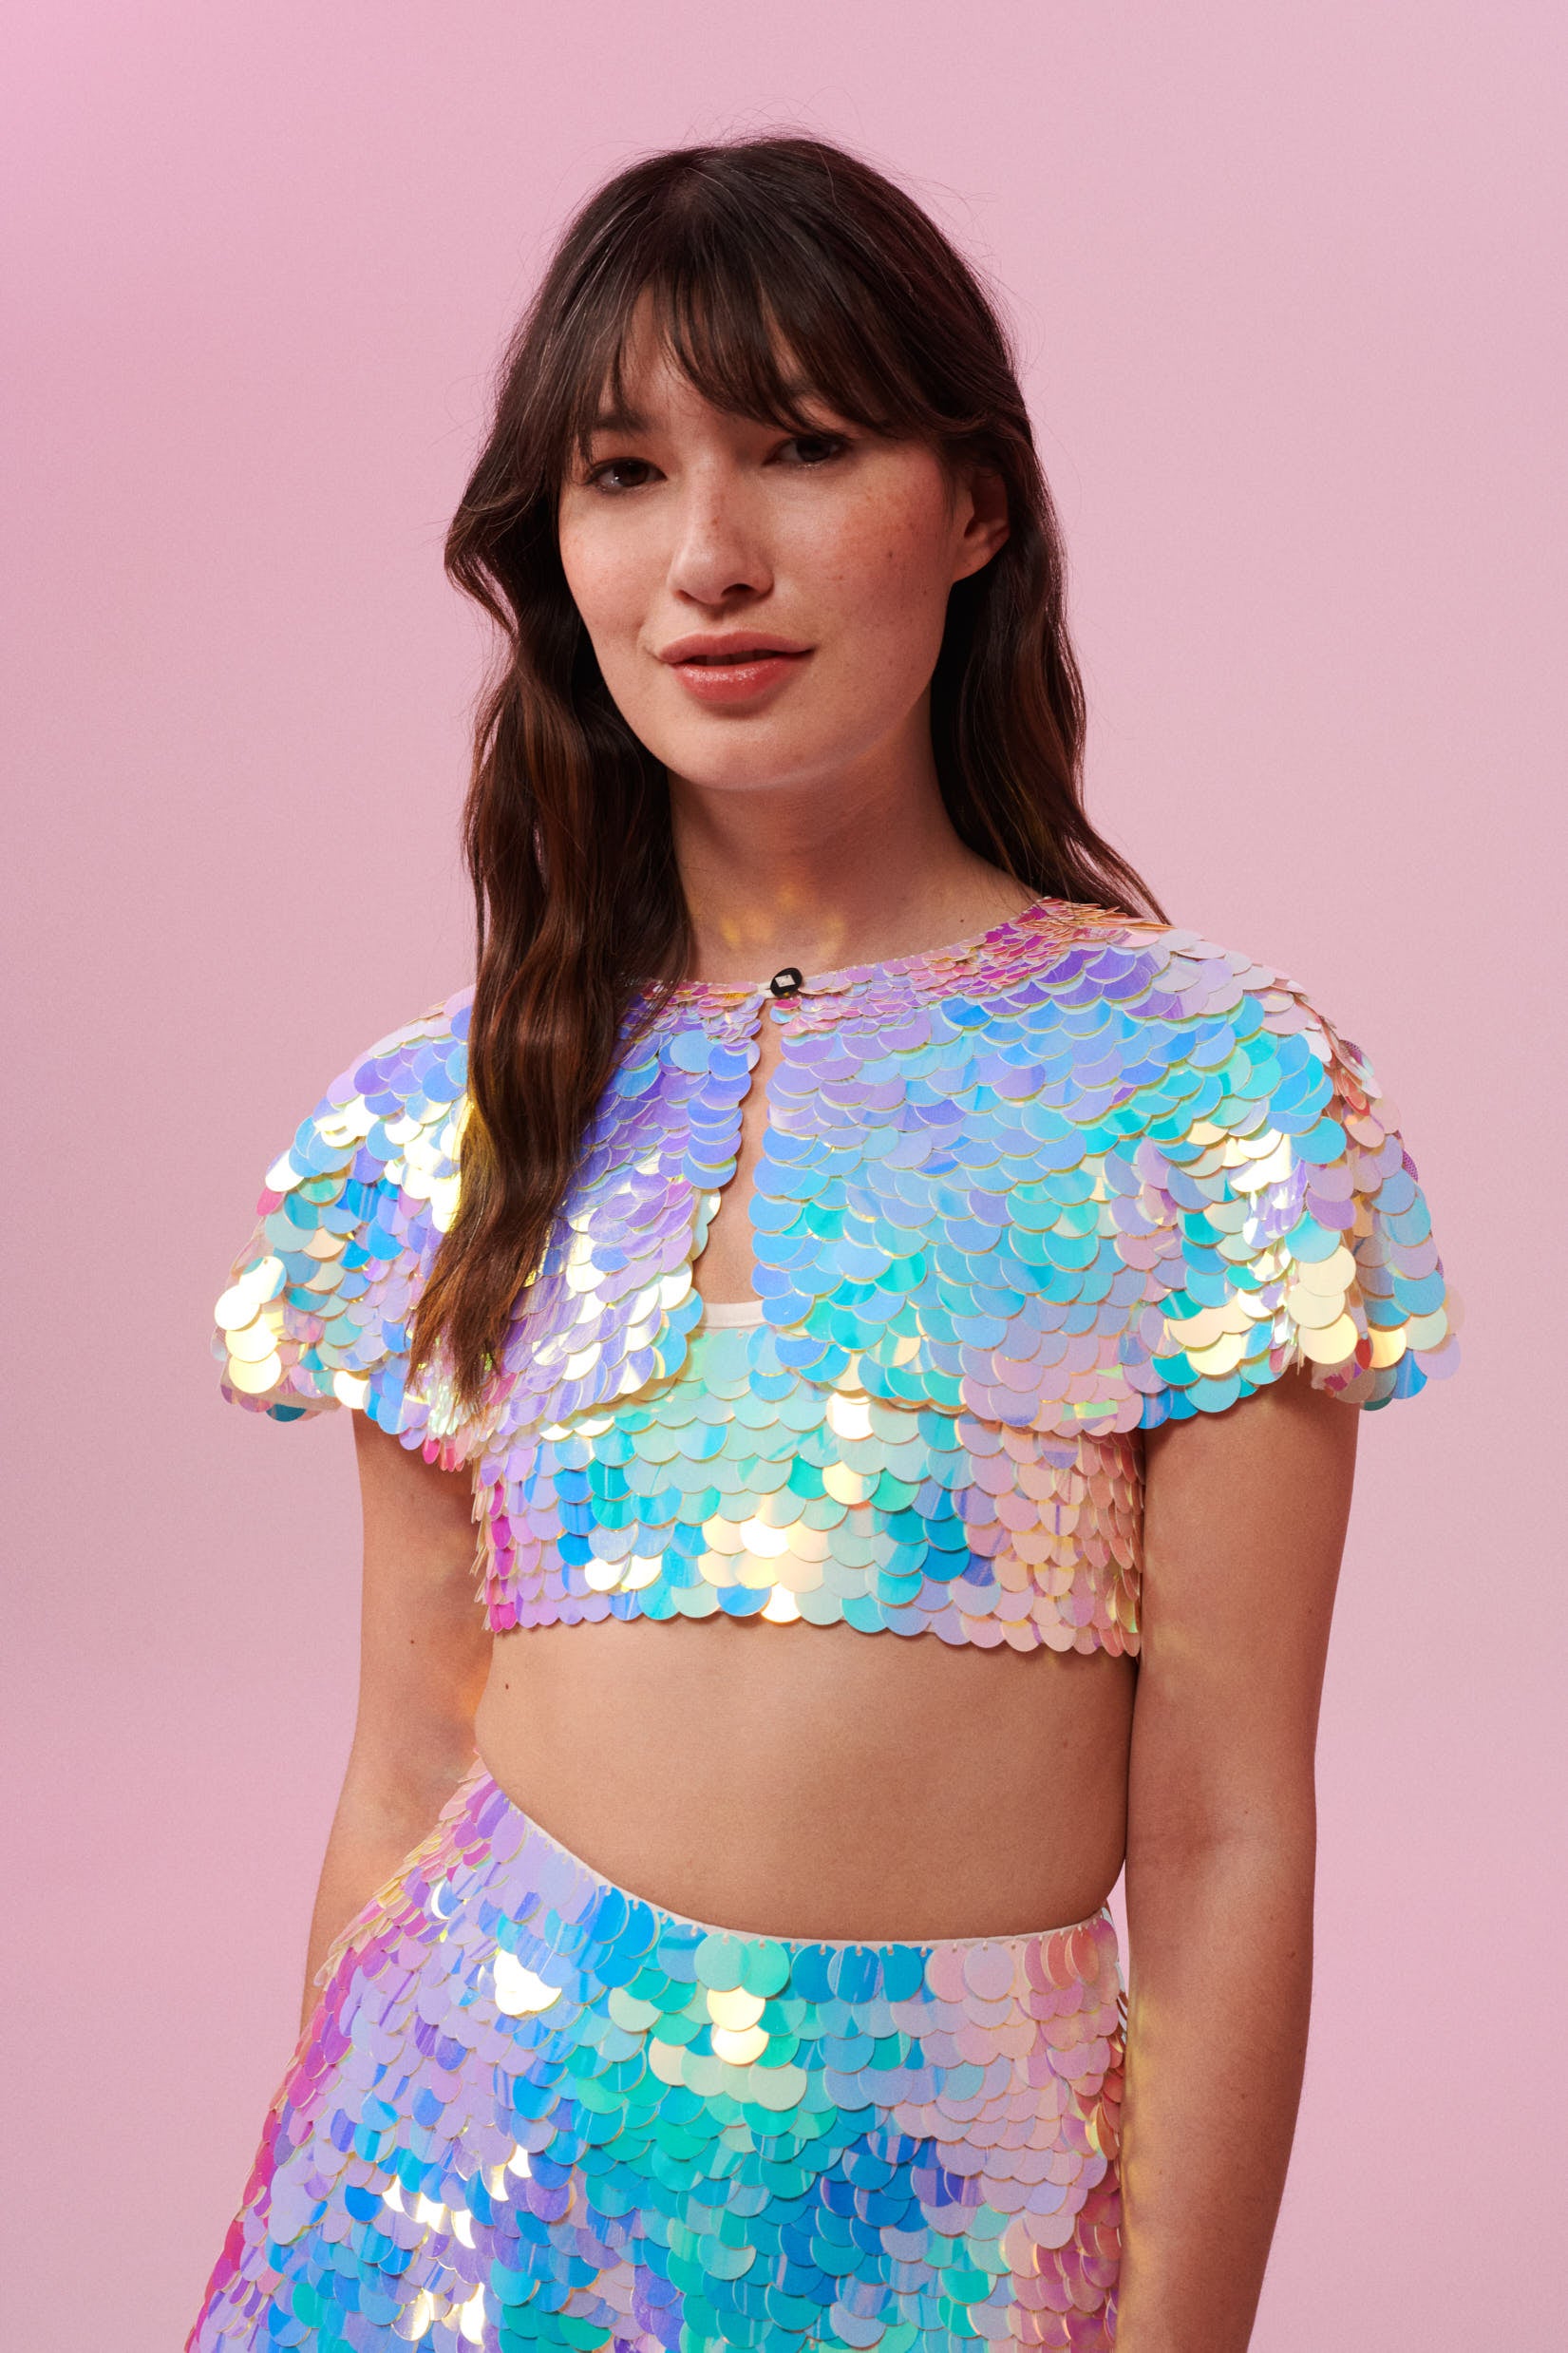 A woman long brown hair with a fringe, swept back to the side, wearing an opal festival sequin cape made with small and large round holographic Rosa Bloom sequins. The Opal sequin cape in this Inti design glistens in the light, creating a mix of shimmering colours of pinks, blues, purples and whites. The model is also wearing a matching sequin vest top and sparkly leggings.